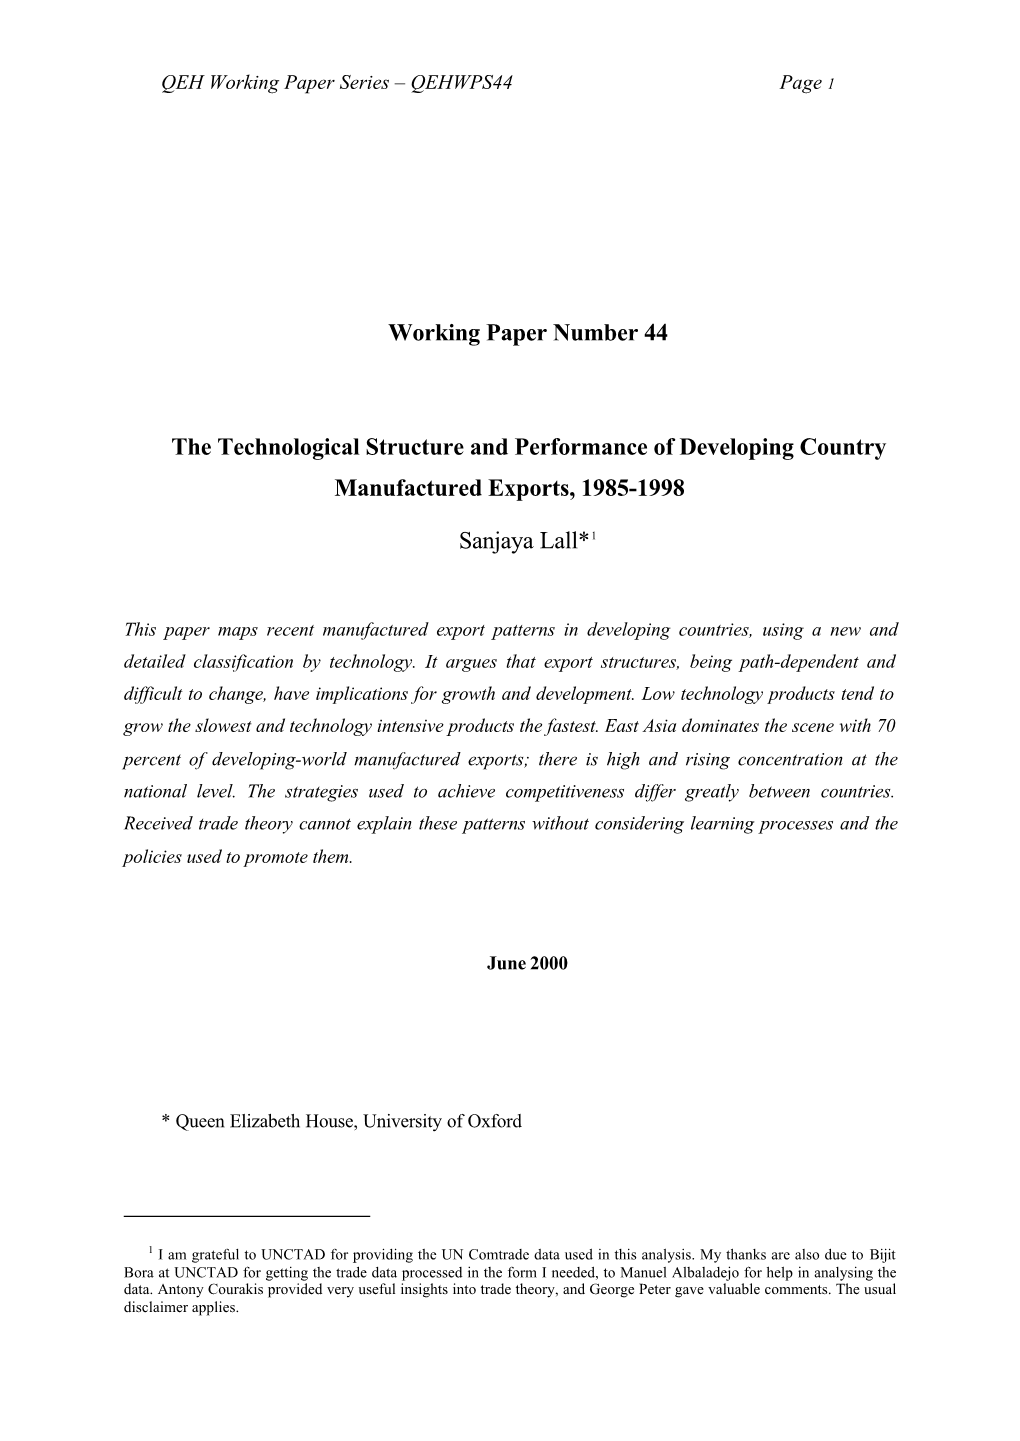 Working Paper Number 44 the Technological Structure And